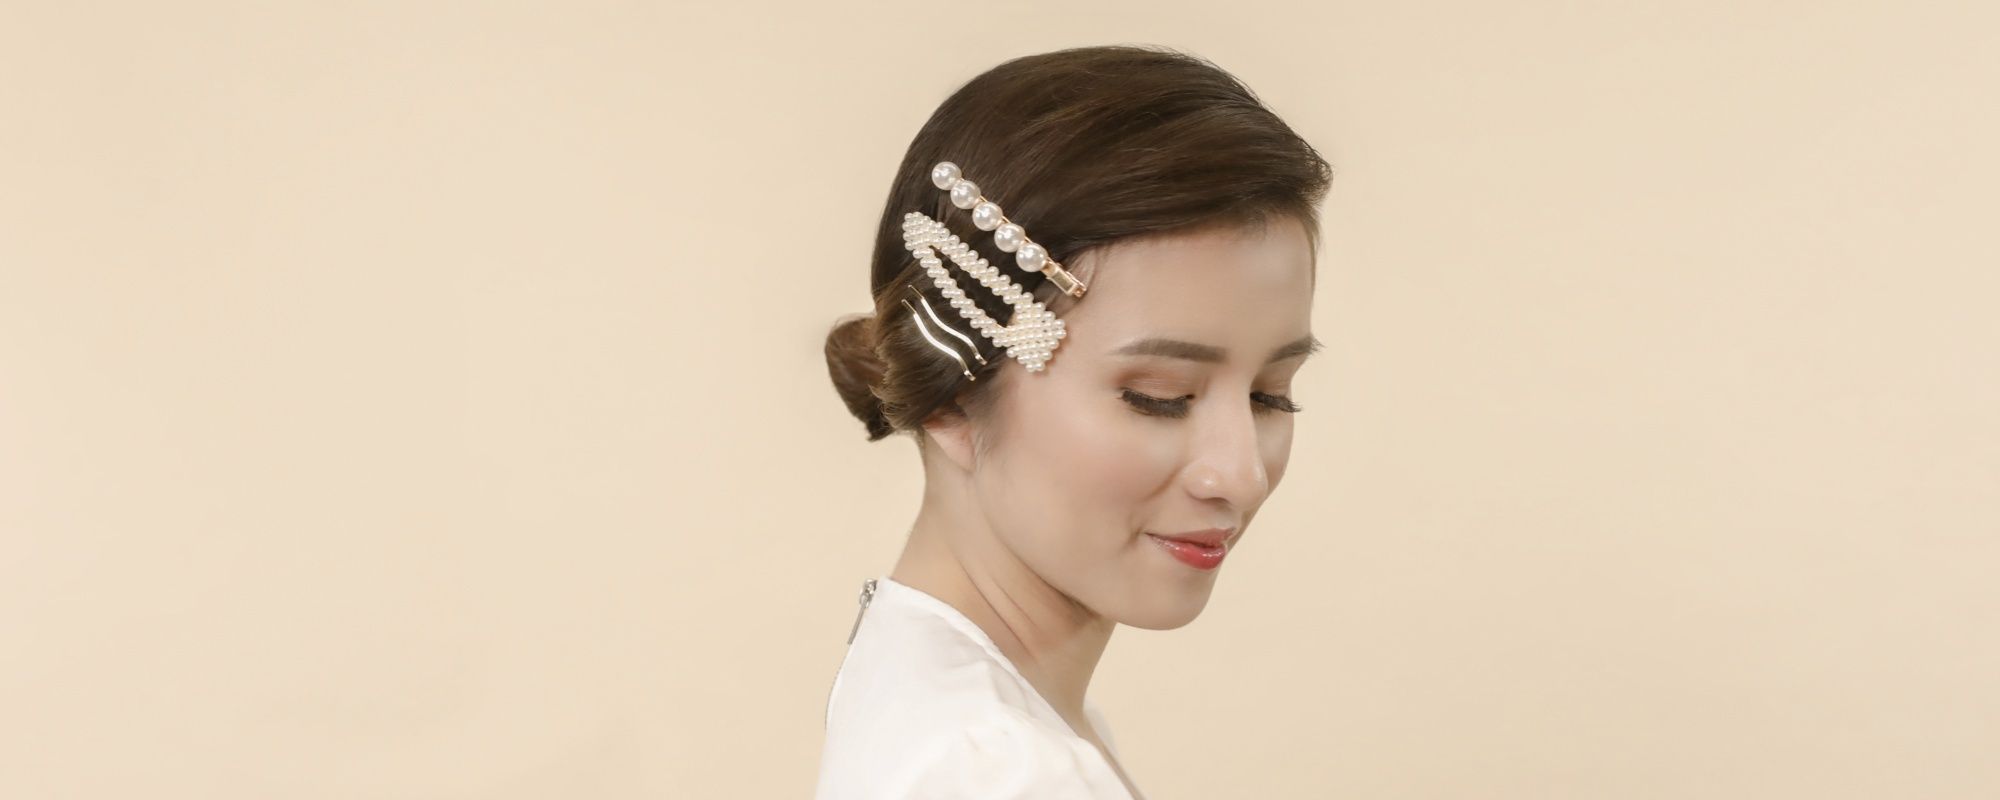 How To Wear Hair Clips? 30+ Simple Styles To Try